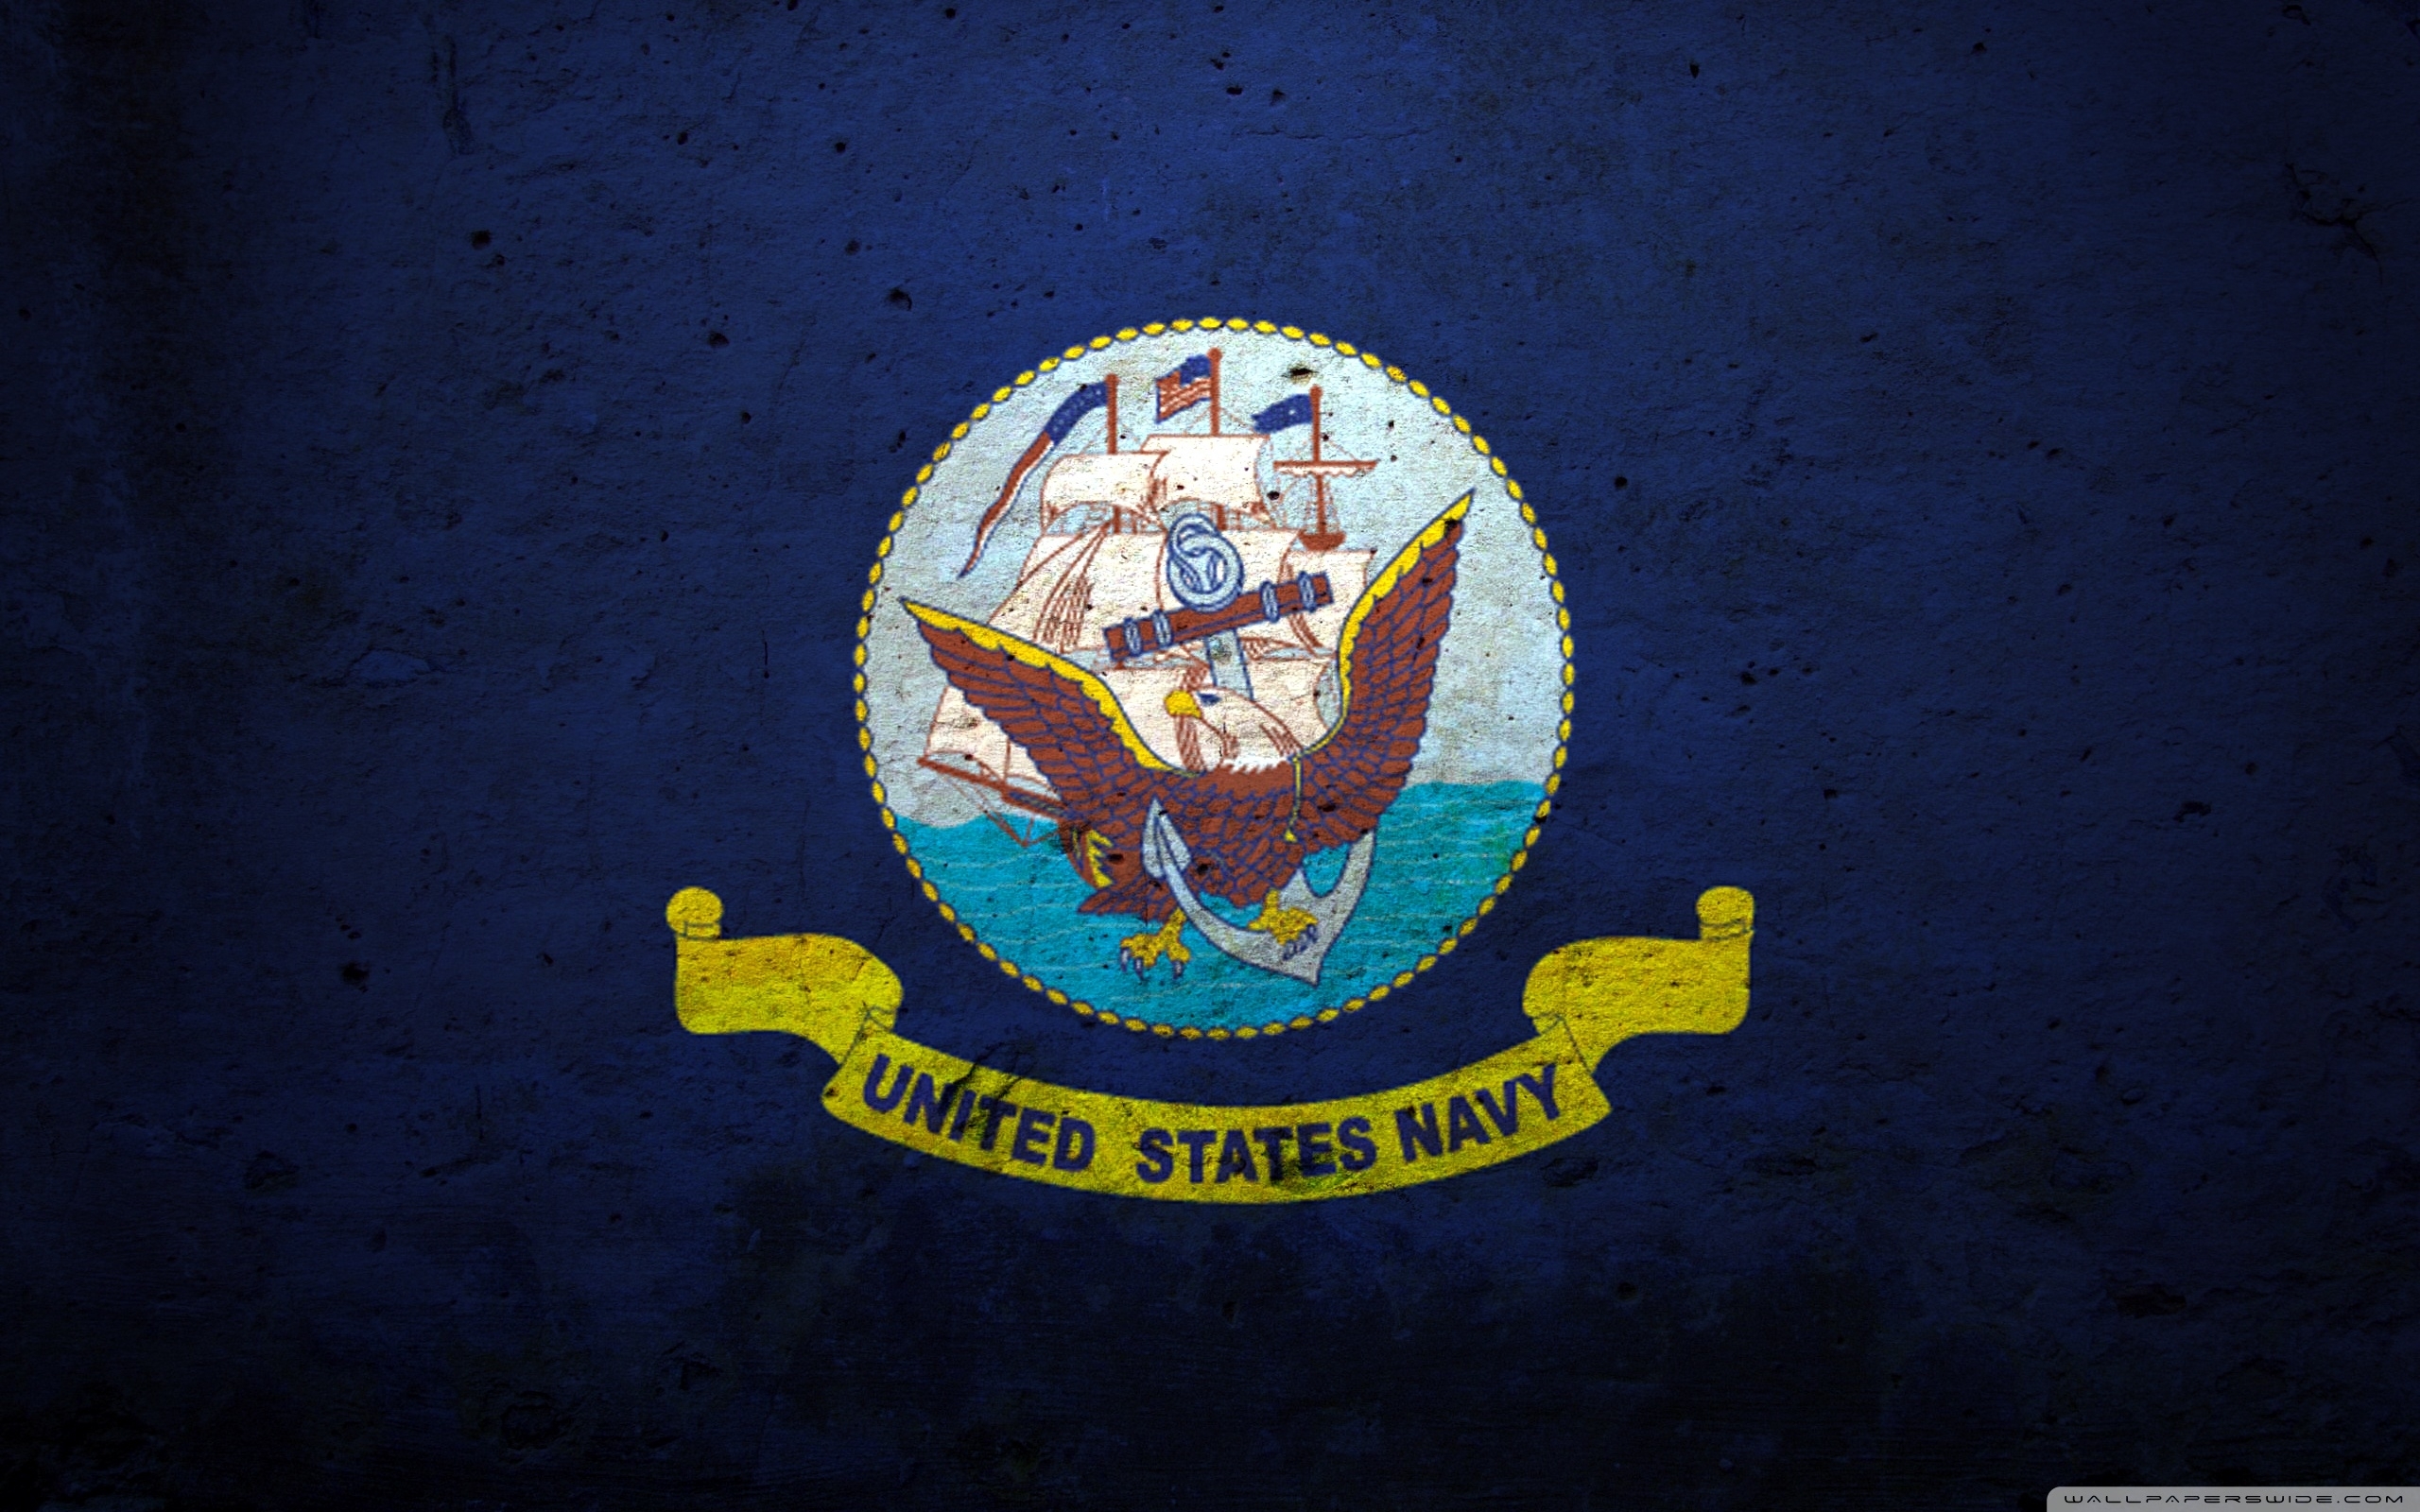 10 Best United States Navy Wallpaper FULL HD 1920×1080 For PC Background